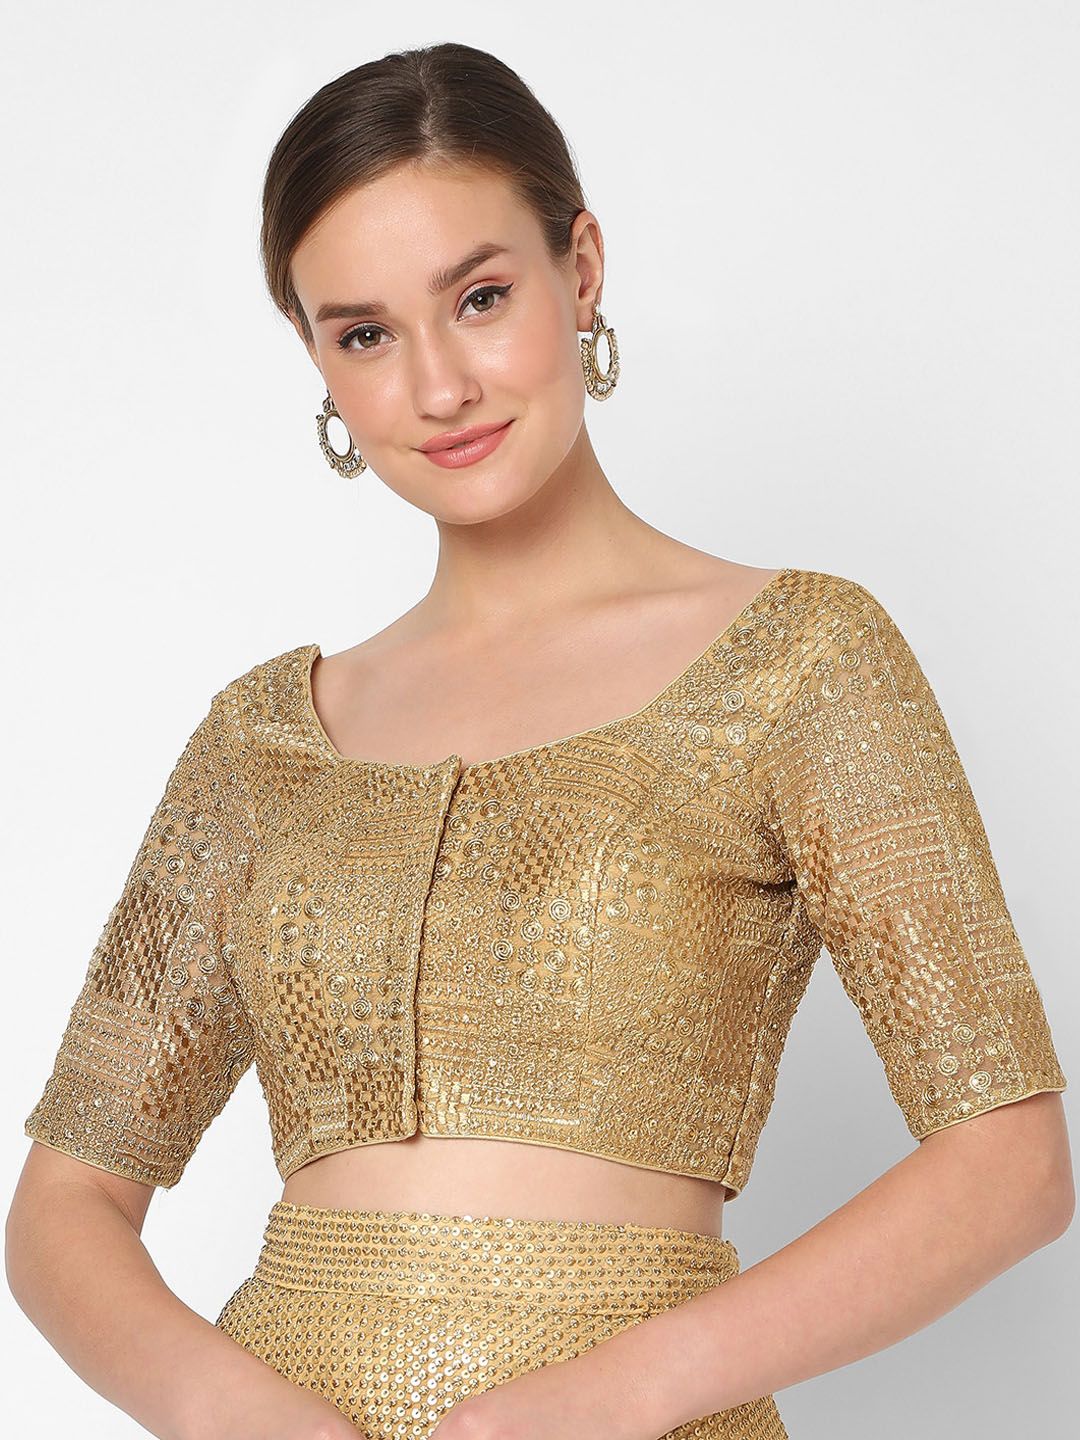 SALWAR STUDIO  Gold-Colored Net Embroidered  Saree Blouse Price in India